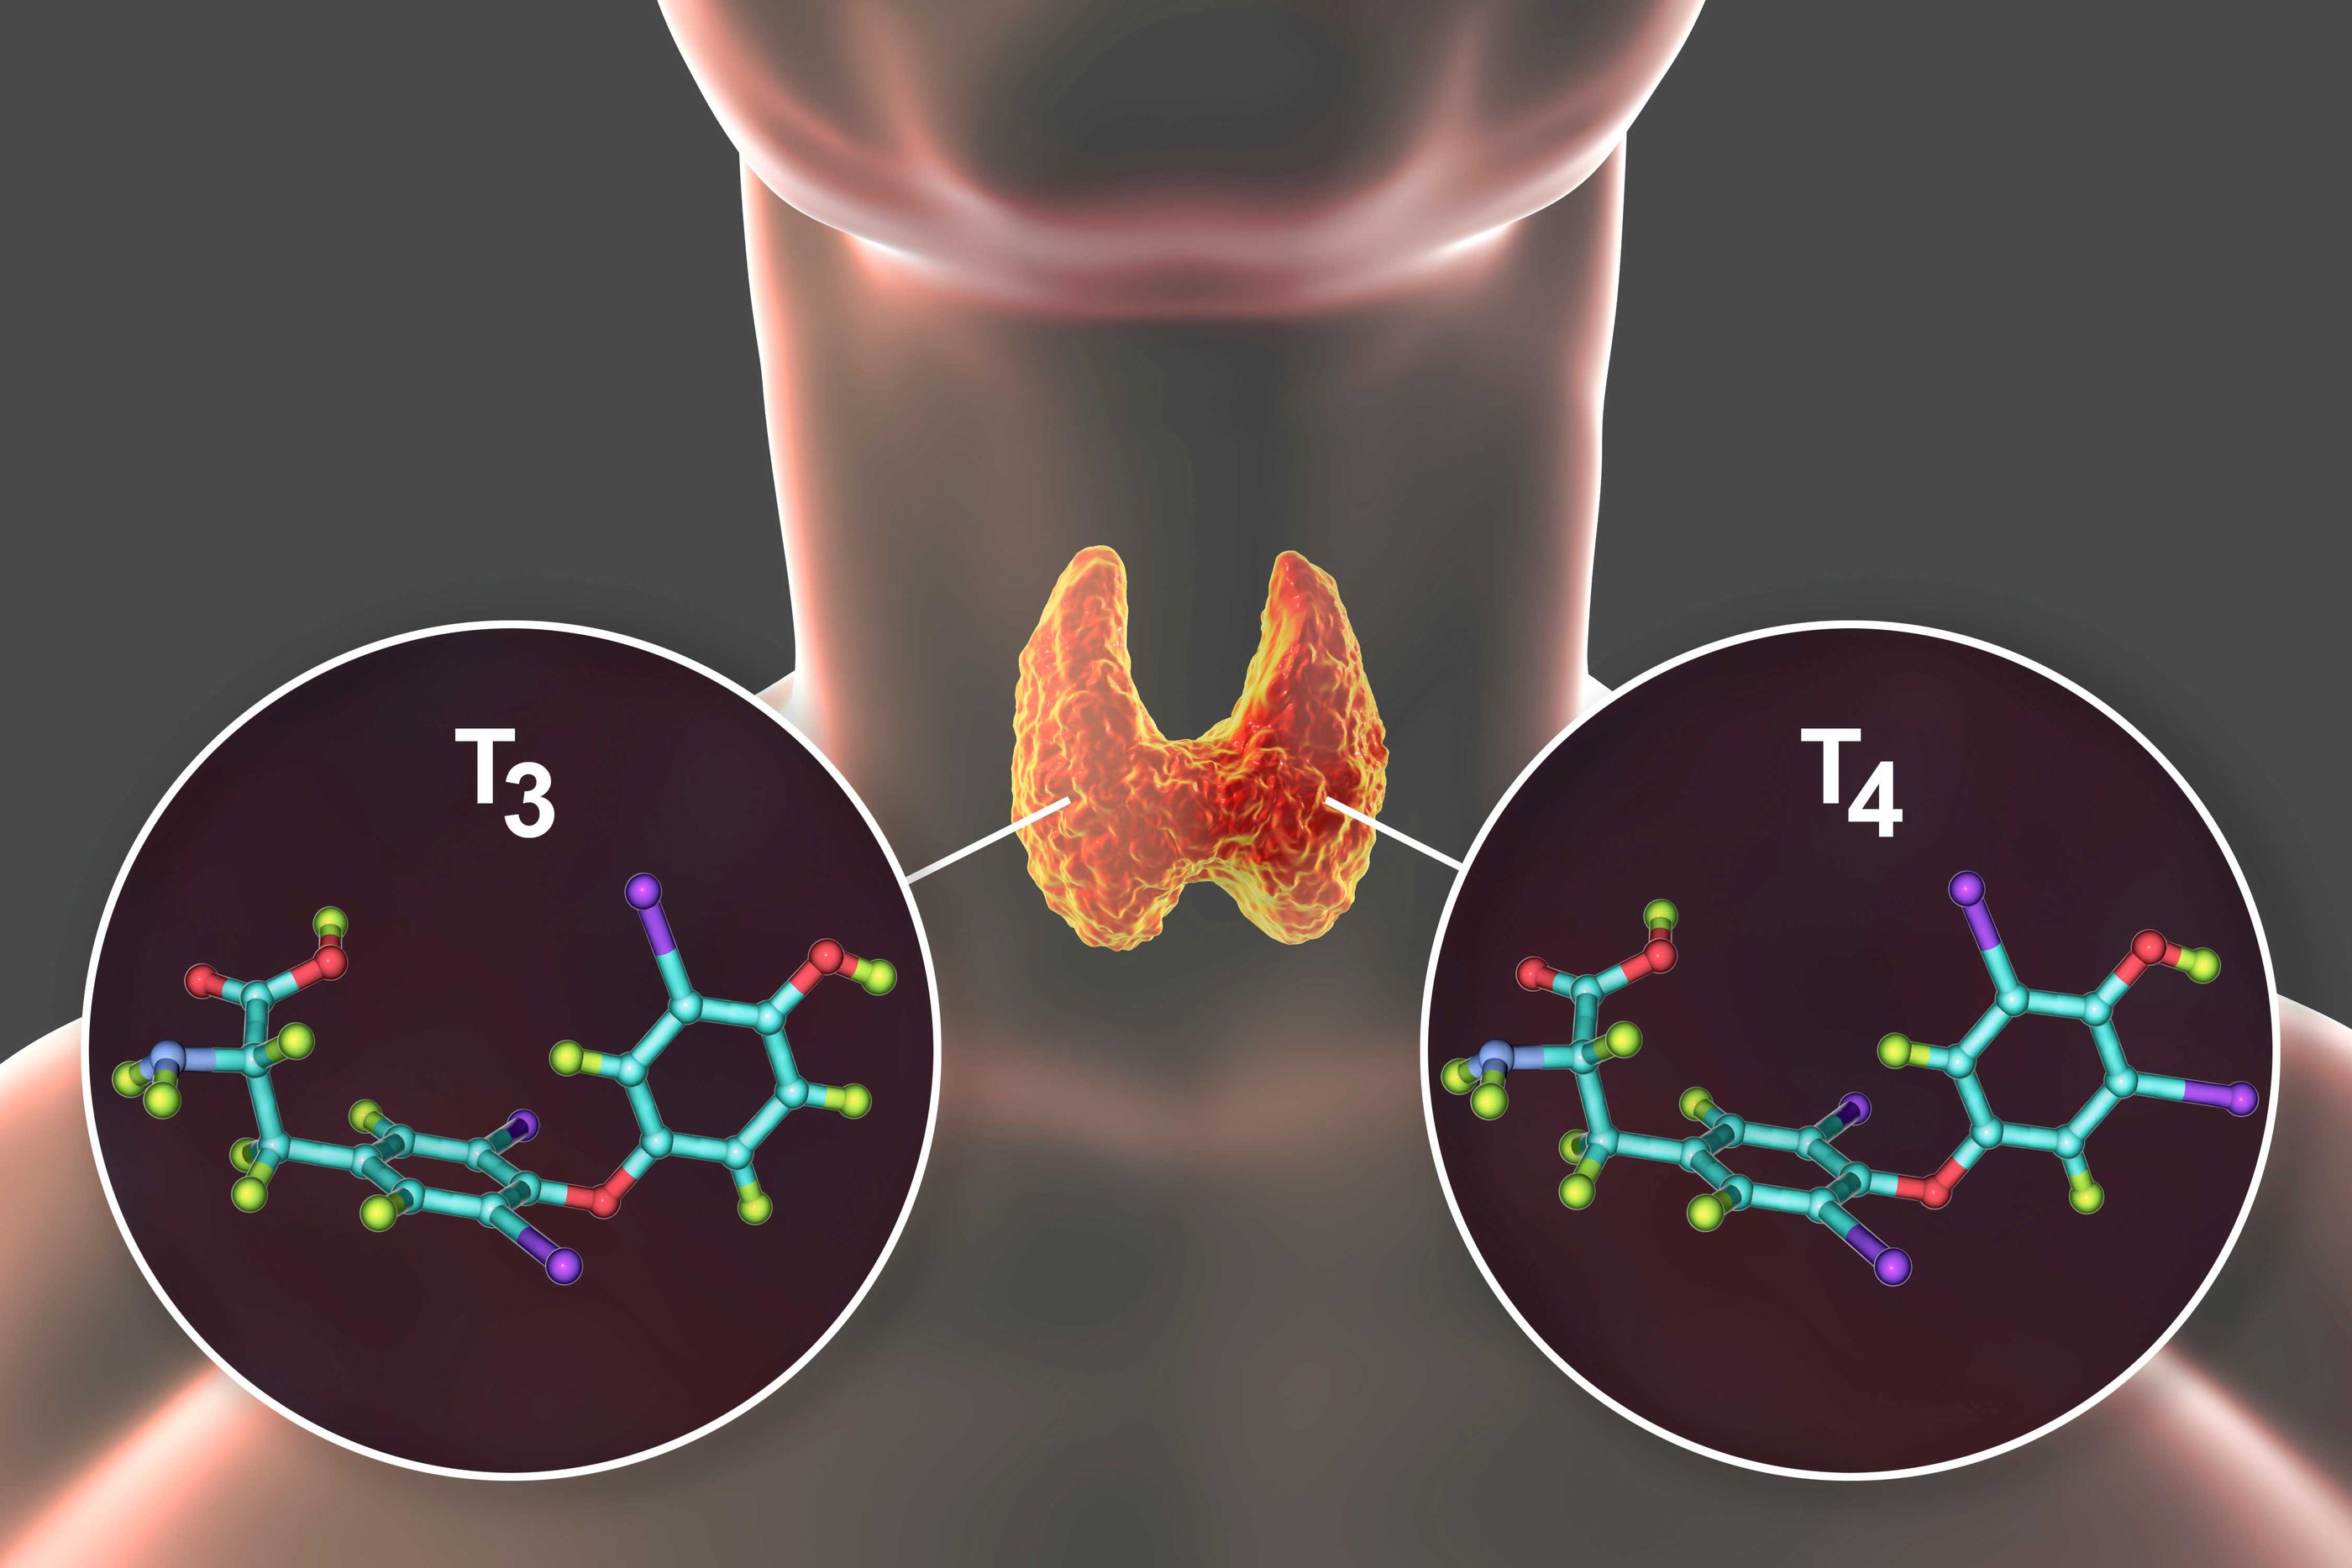 Thyroid hormones - What are they, and how do they affect our body?